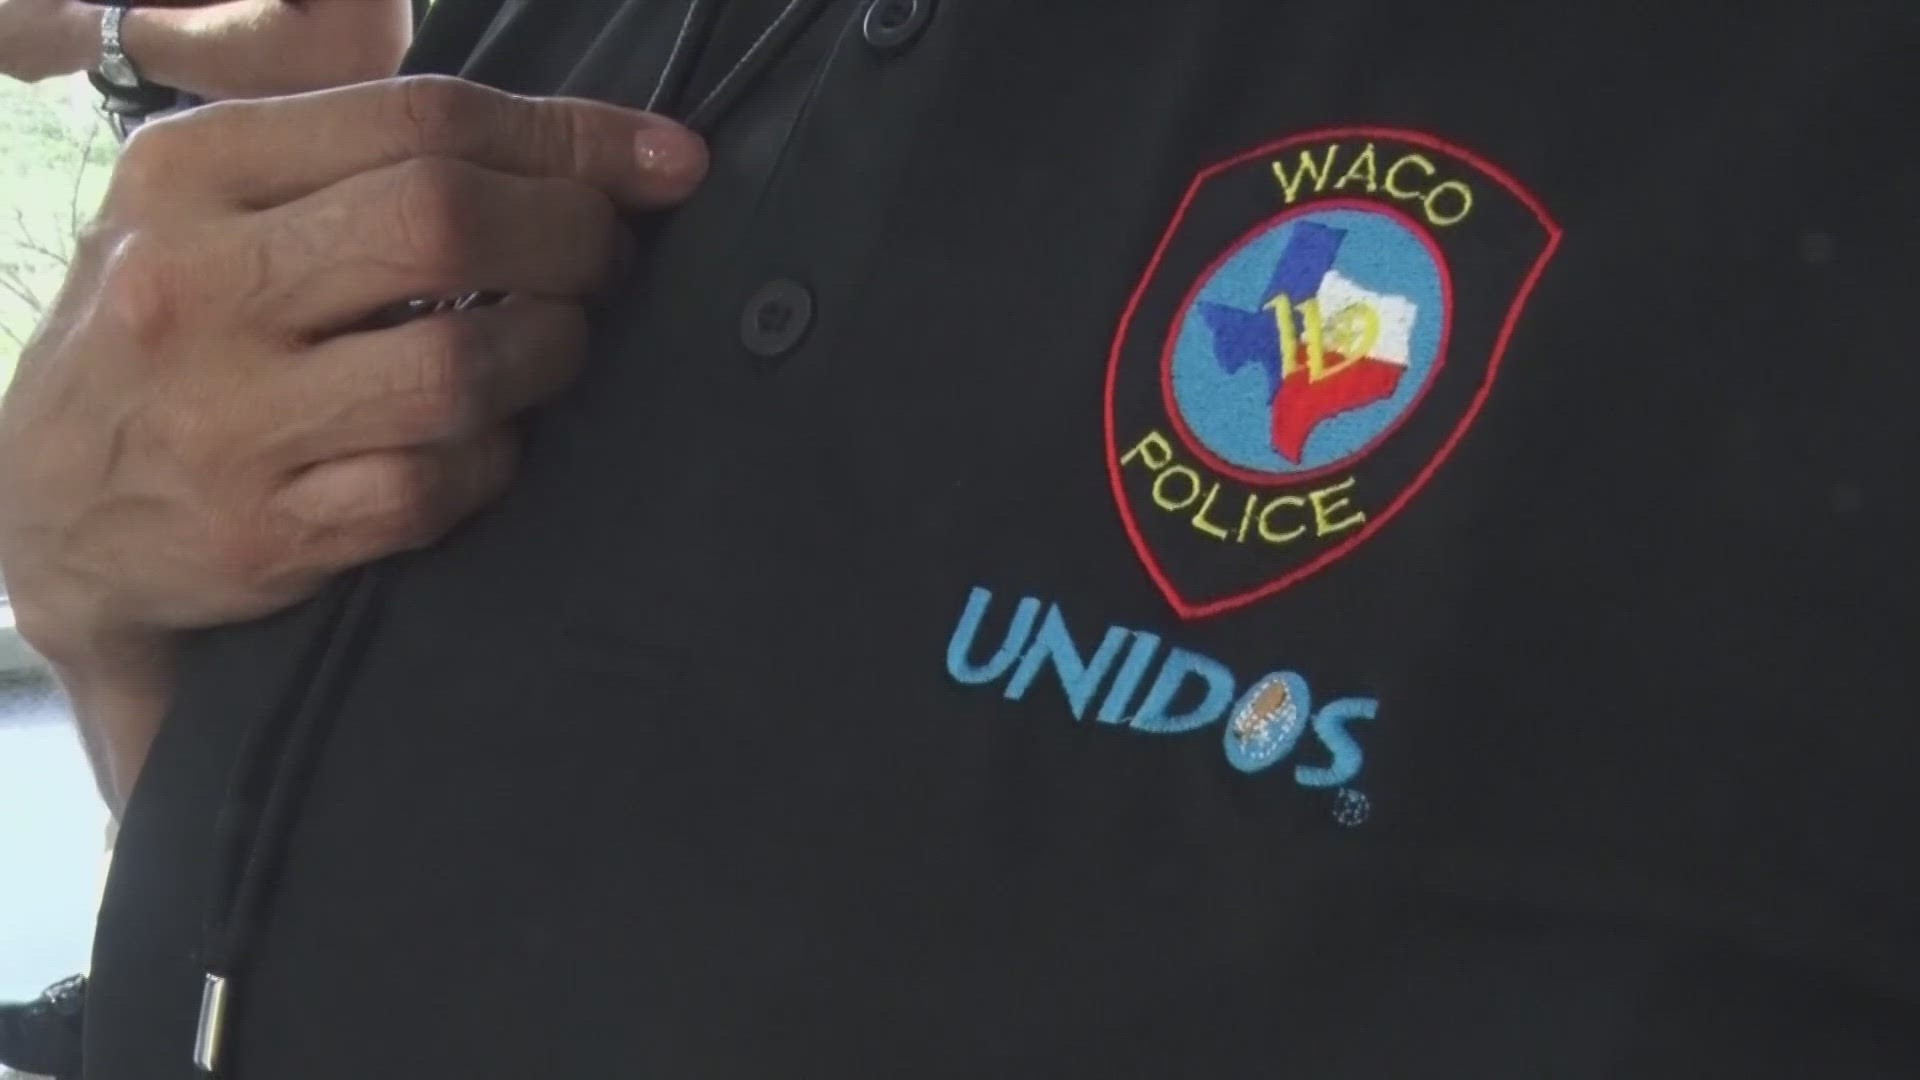 On March 15, 2023, Waco PD held its first event launching a brand new program to guide and support the Latino community in the city.